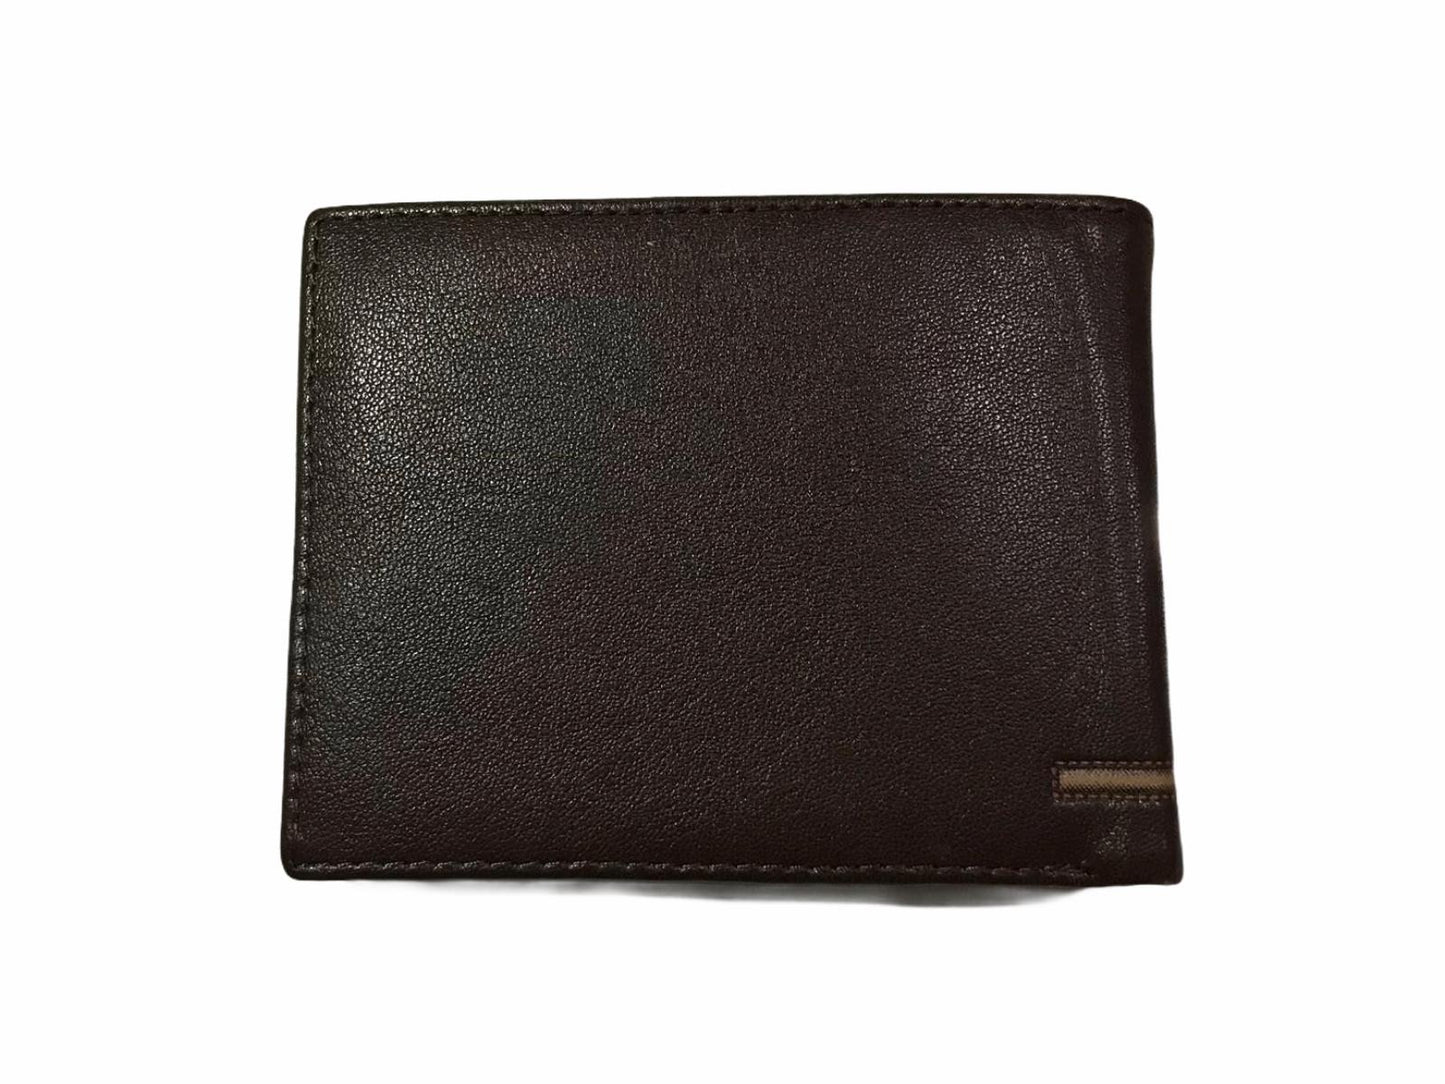 Cimarron | Card holder, wallet and purse 114 brown